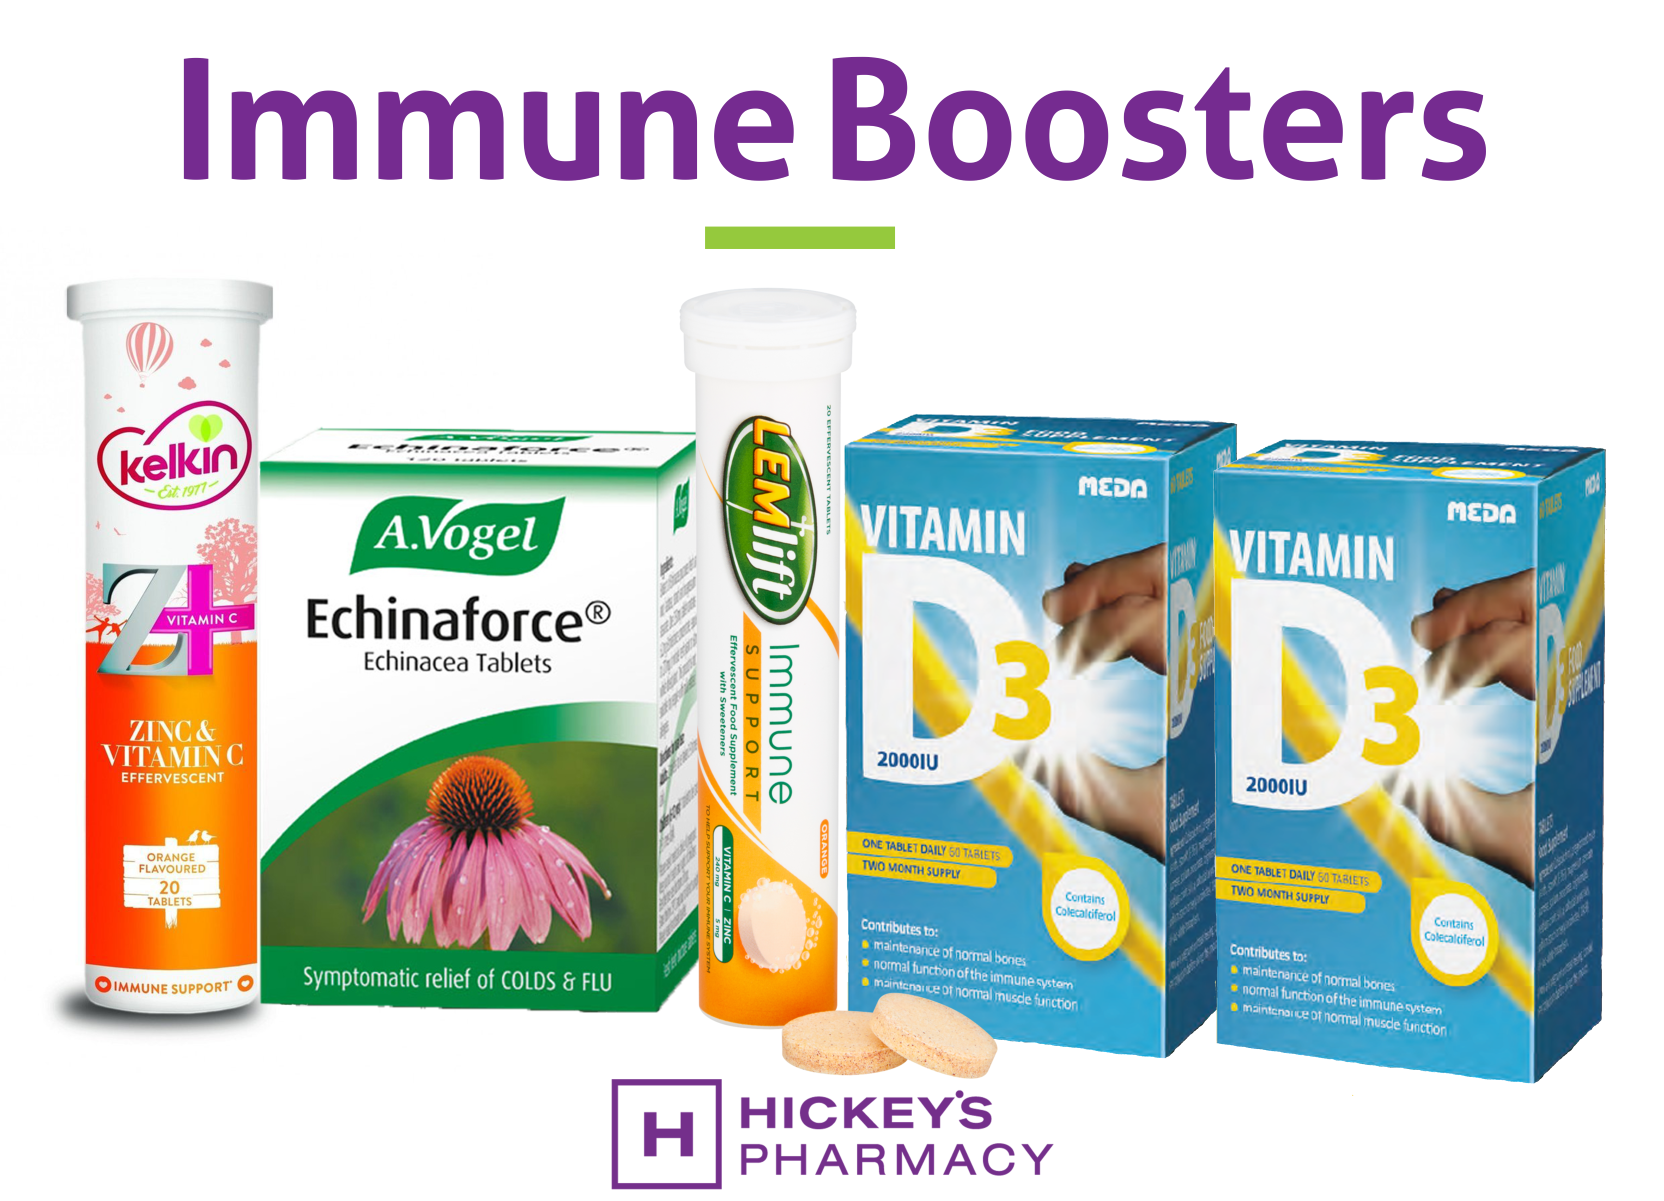 Vitamins and minerals are essential for our health. Hickeys Pharmacy have the range